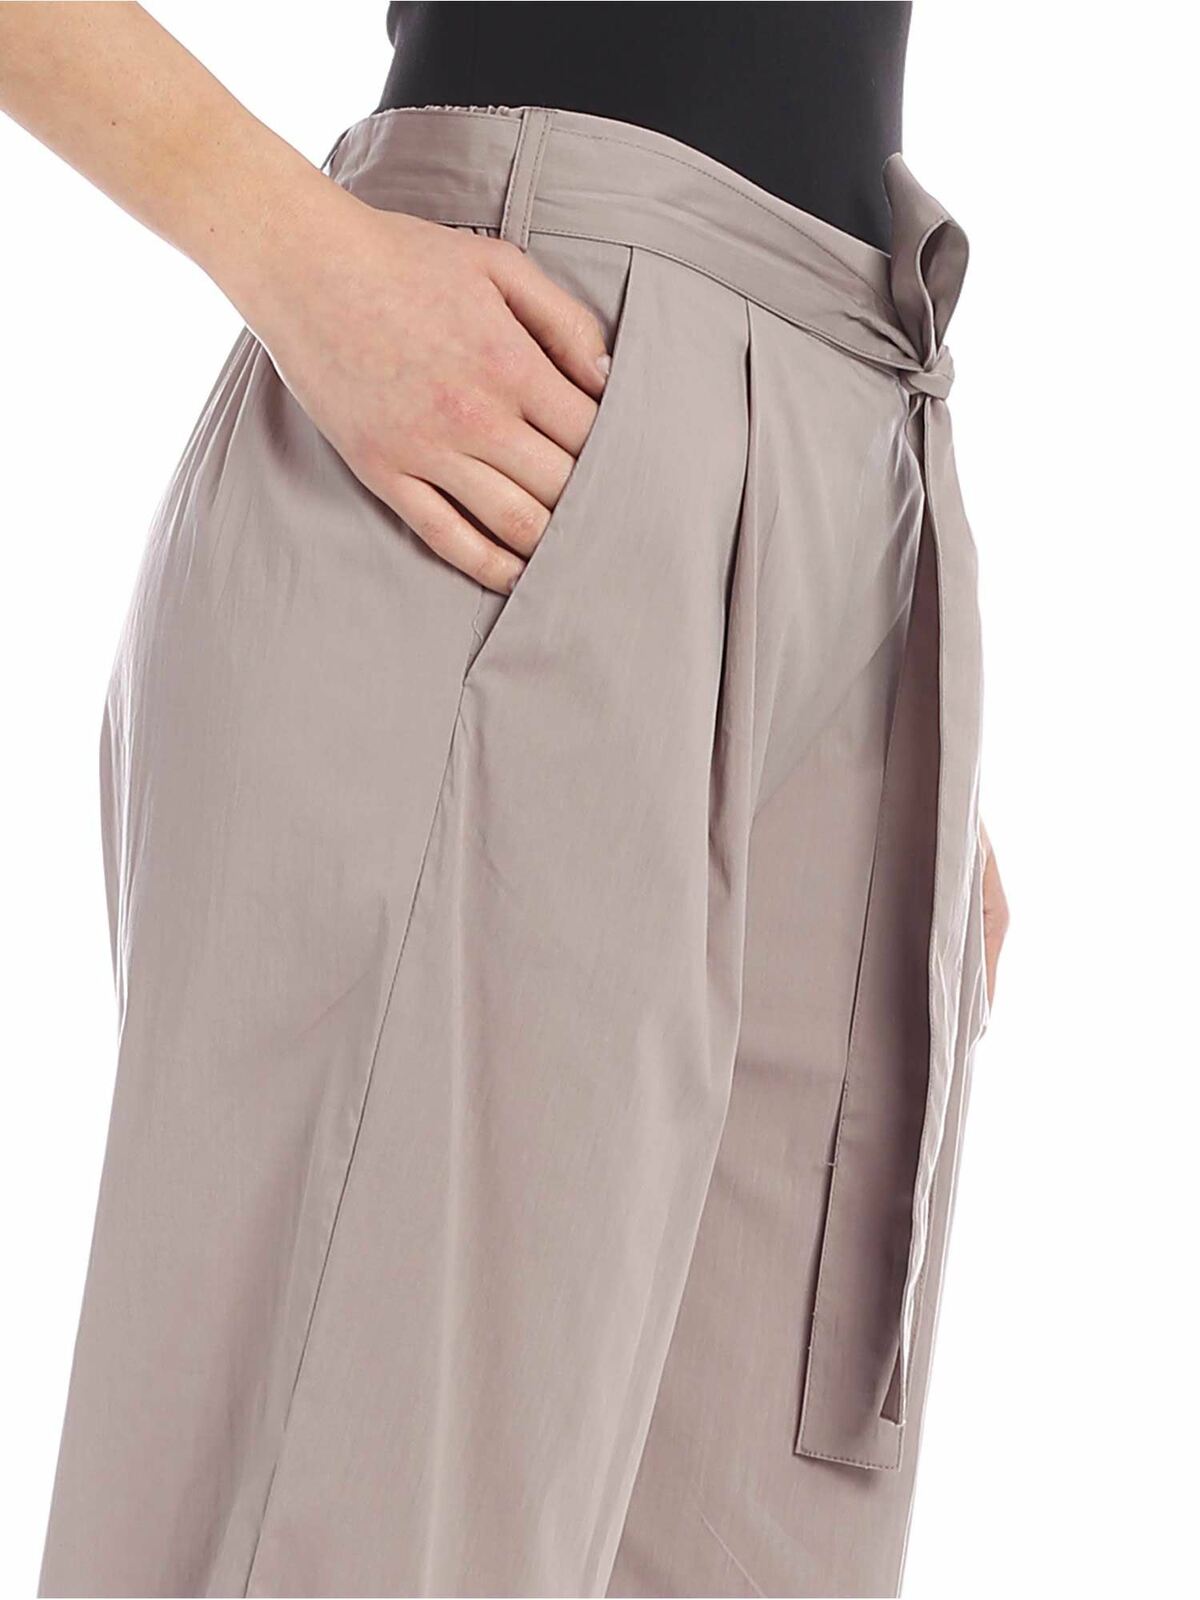 Shop Dkny Crop Pants In Dove Gray With Bow At The Waist In Brown